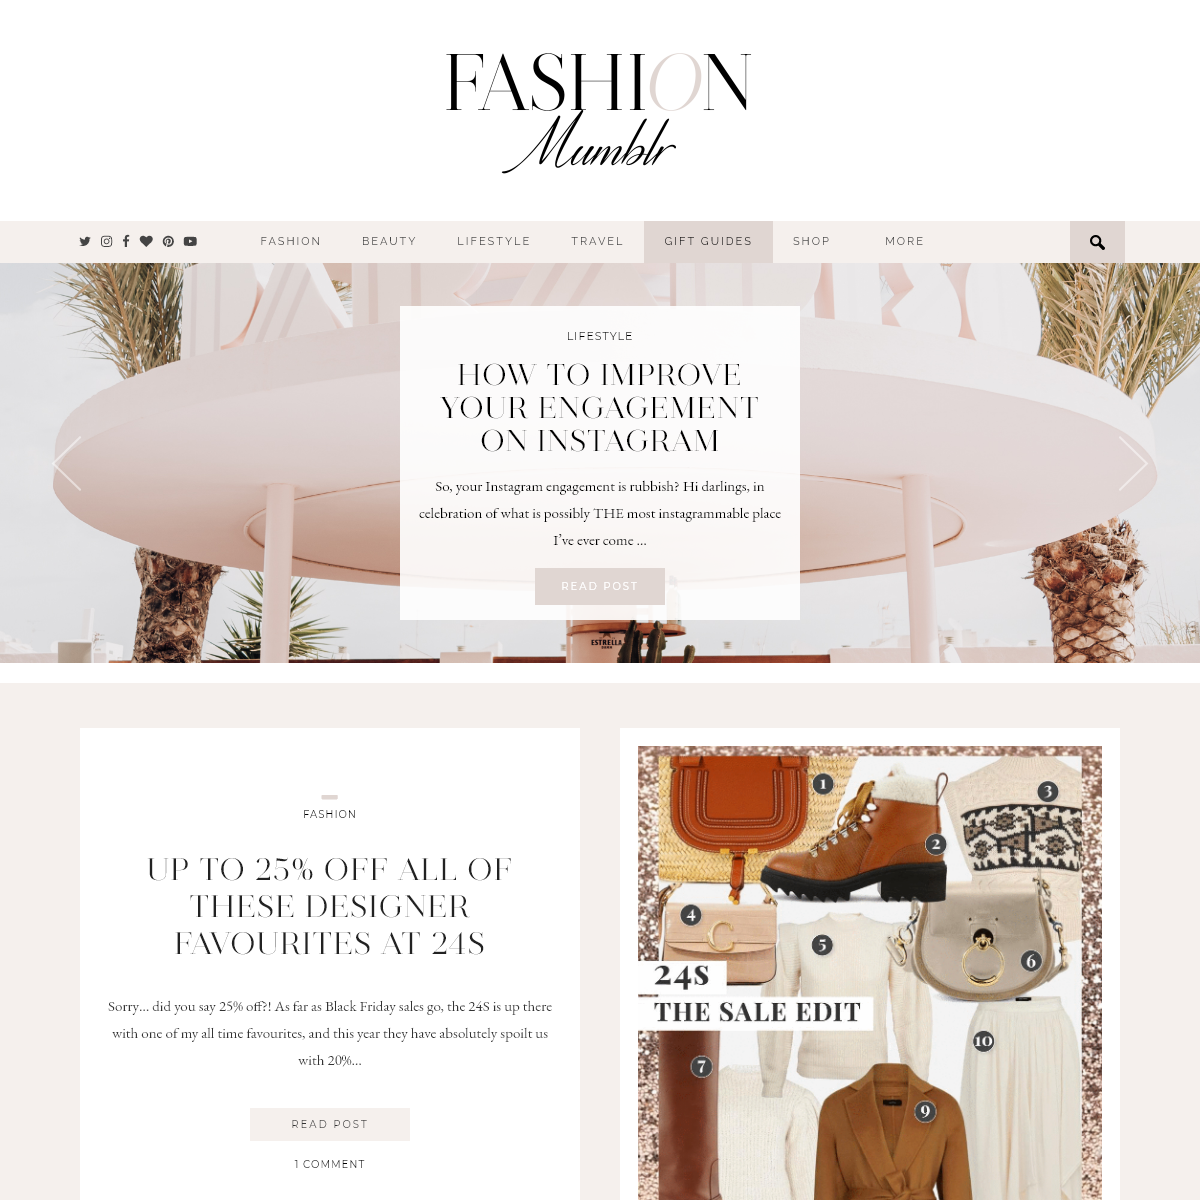 A complete backup of fashionmumblr.com